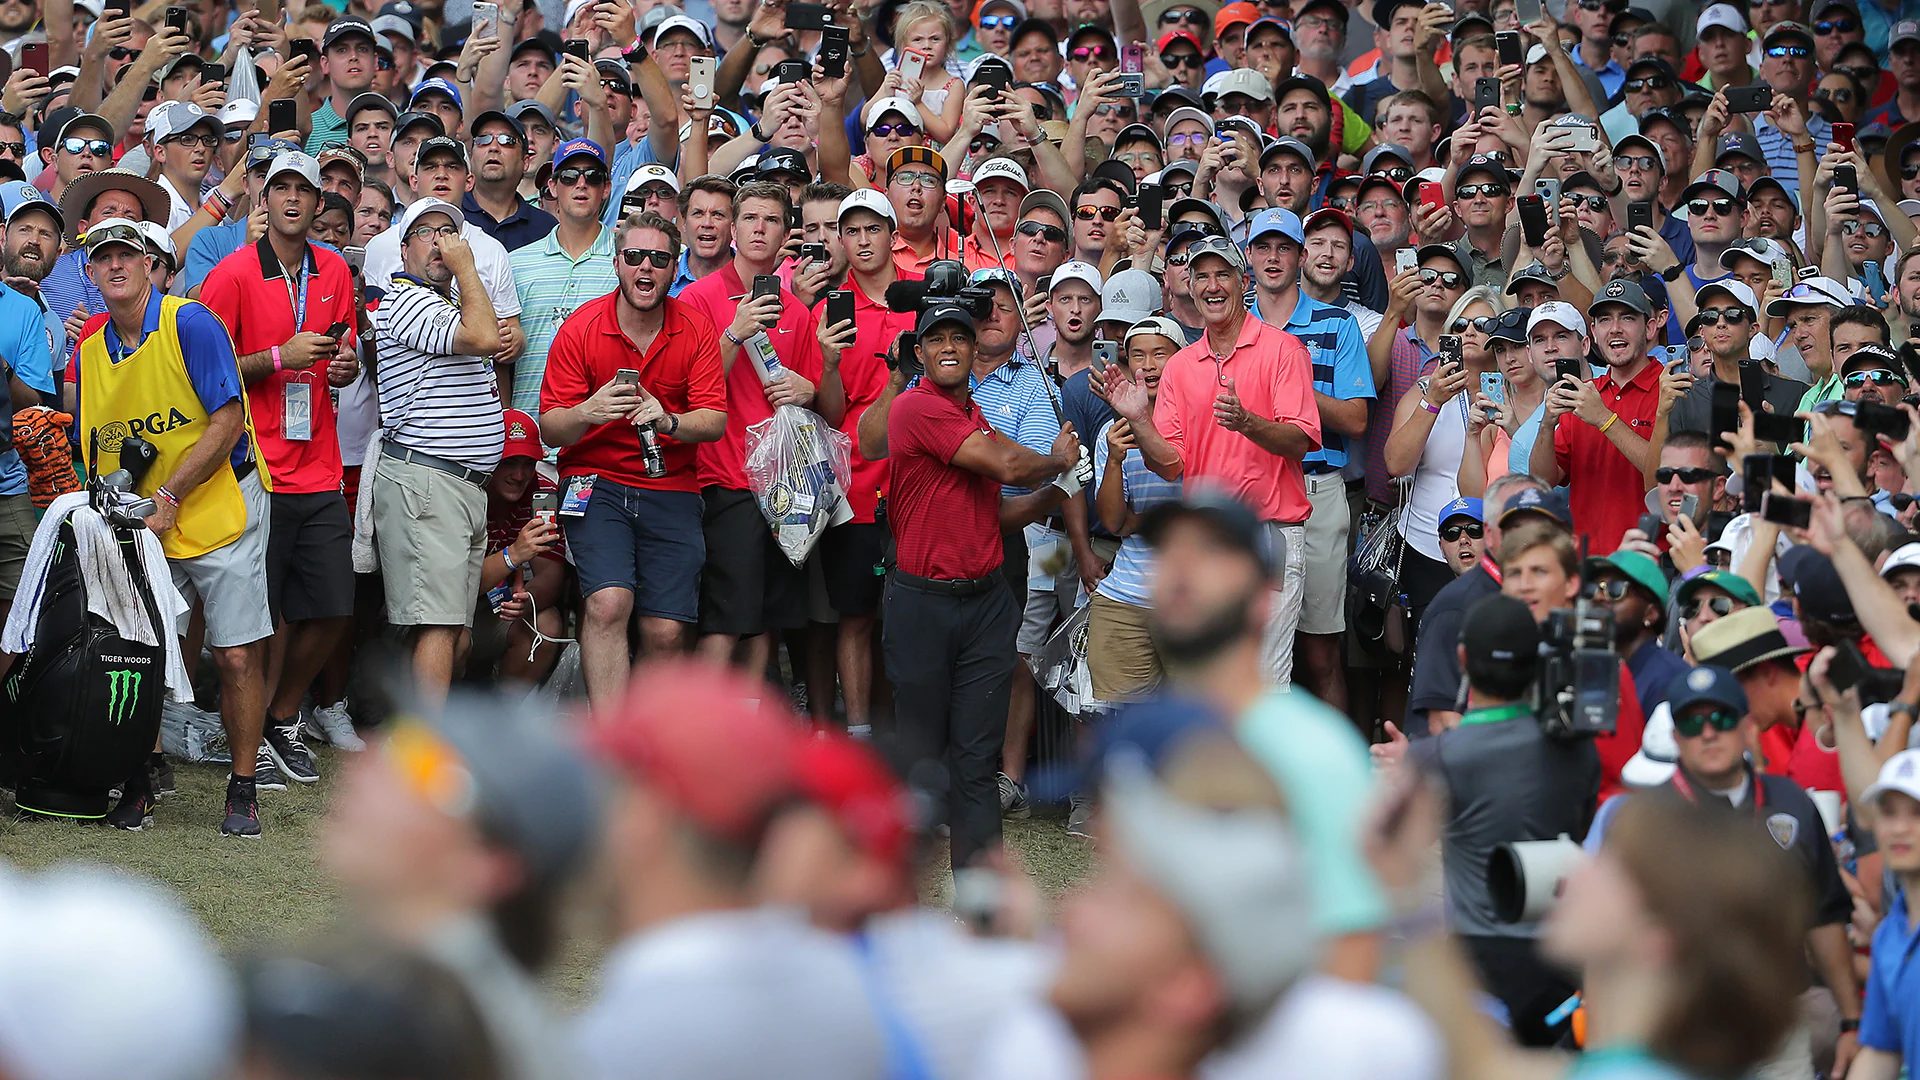 First week without fans will look, feel and sound like no other in Tiger Woods’ career